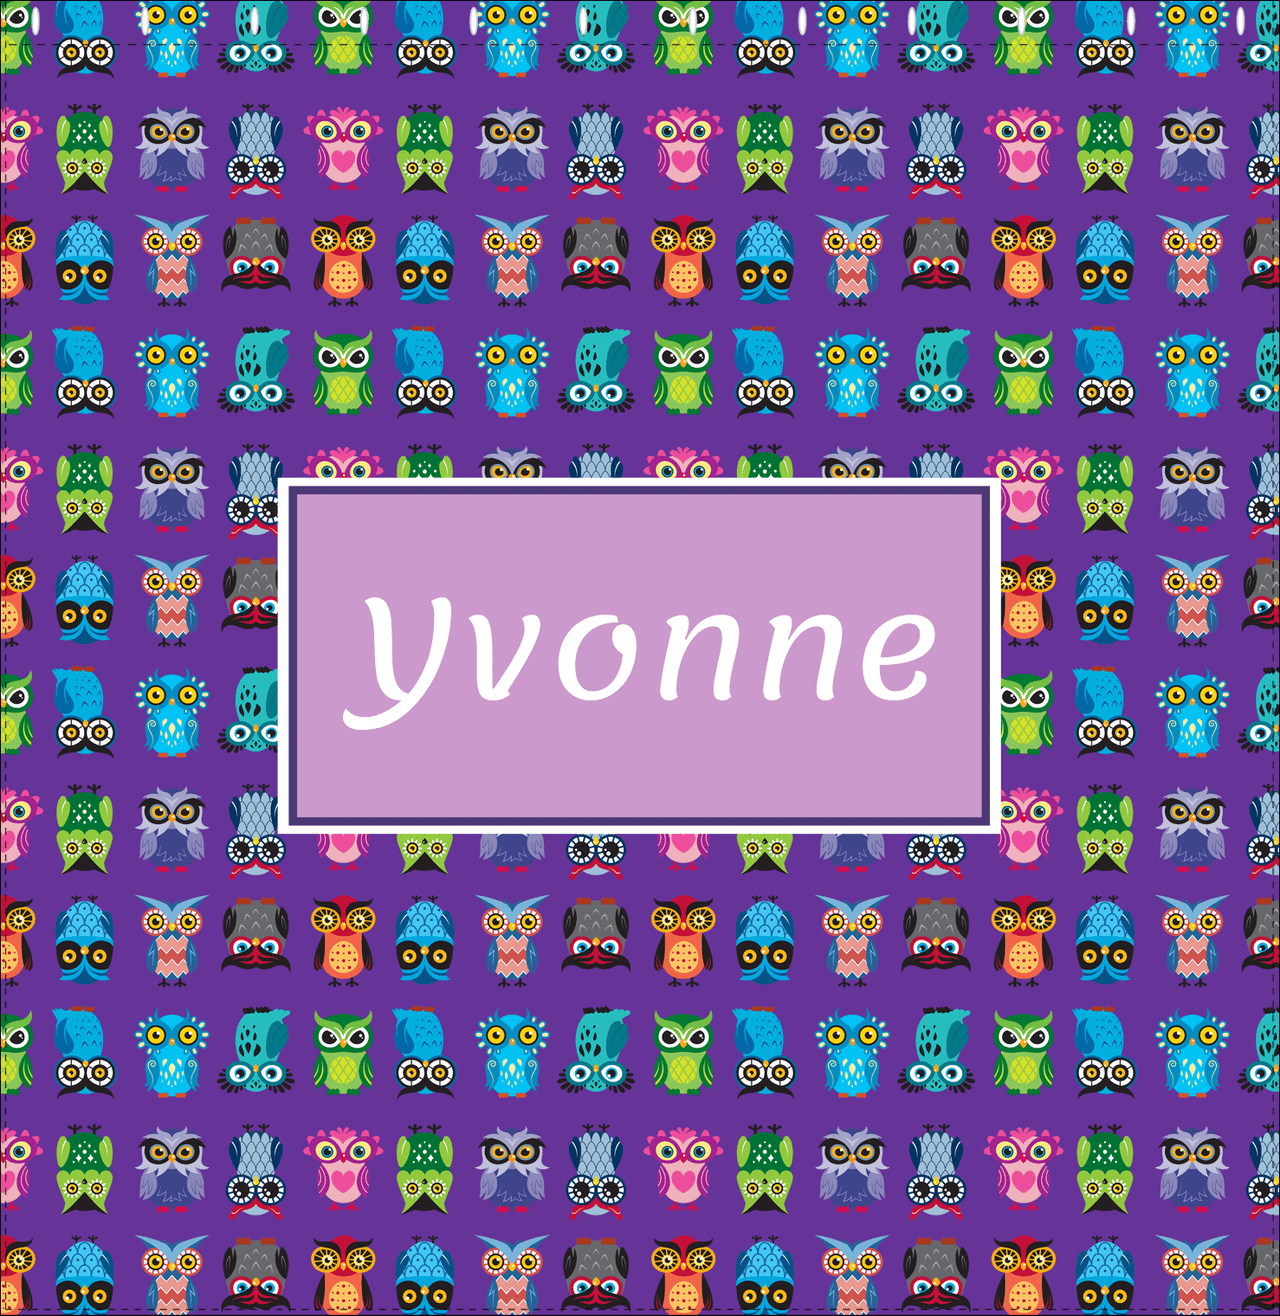 Personalized Owl Shower Curtain X - All Owls - Purple Background - Rectangle Nameplate - Decorate View